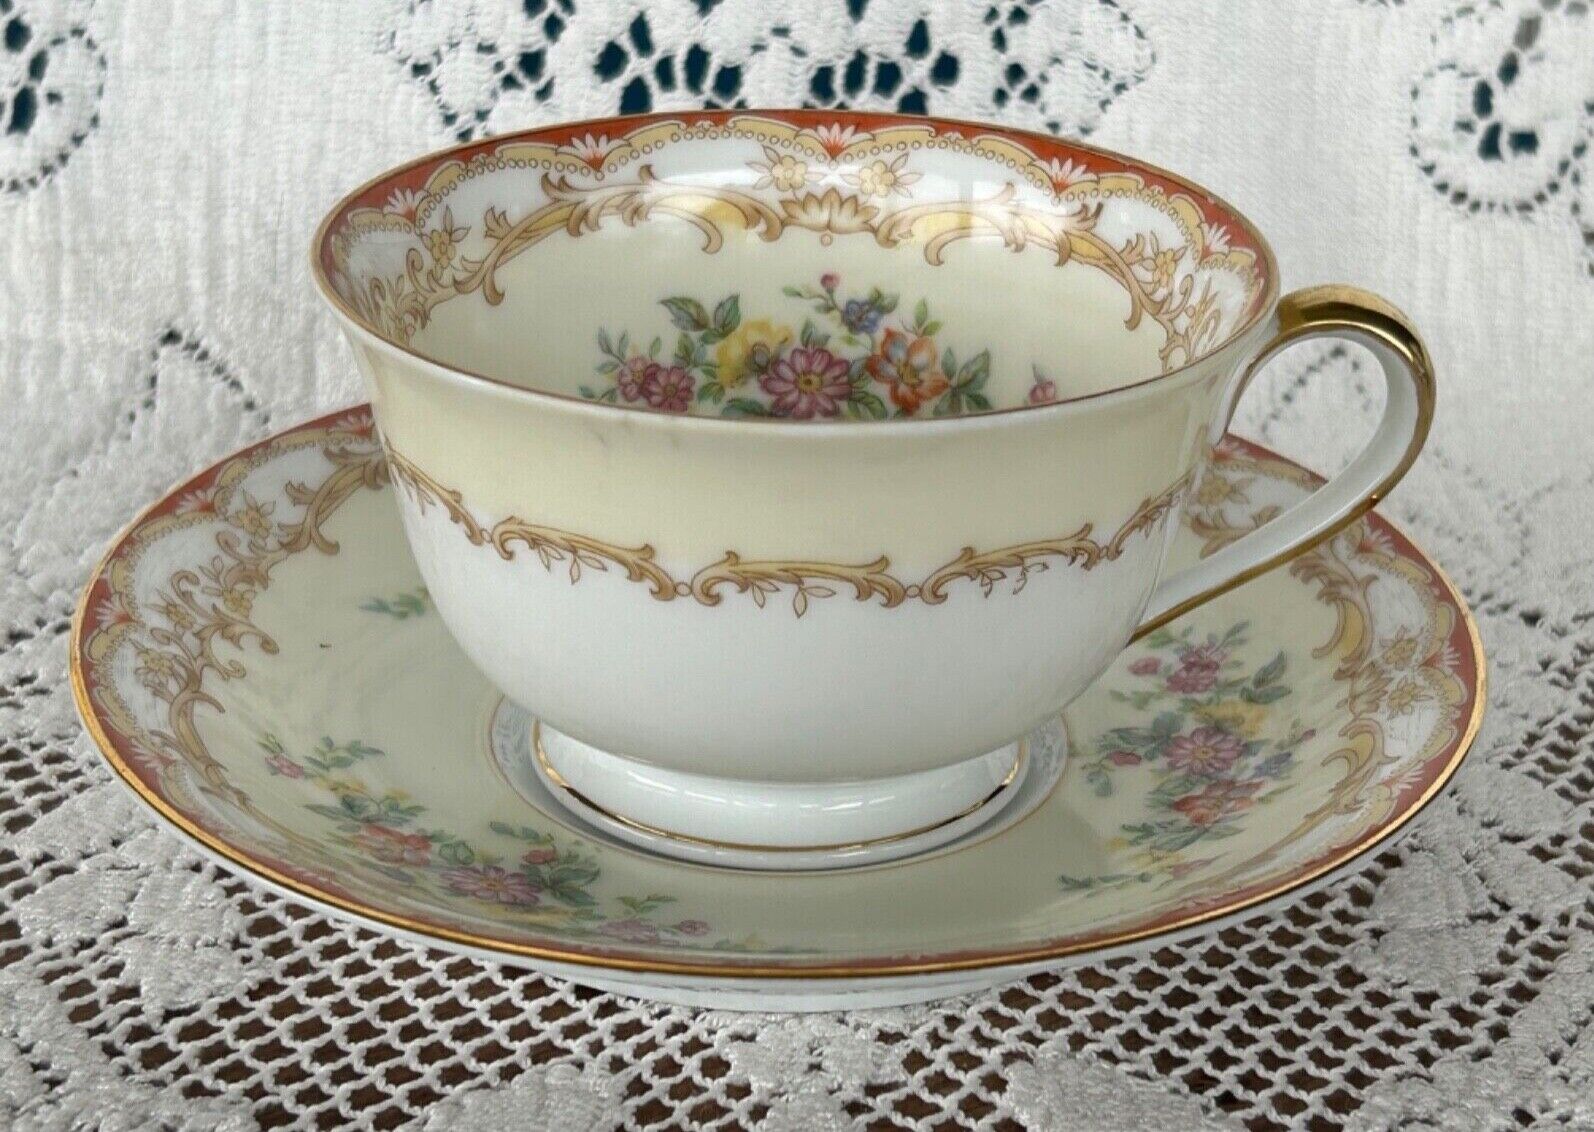 Rare VTG Noritake “MALONA” Lovely Cup & Saucer Set Red Edge Floral Bouquets EXC